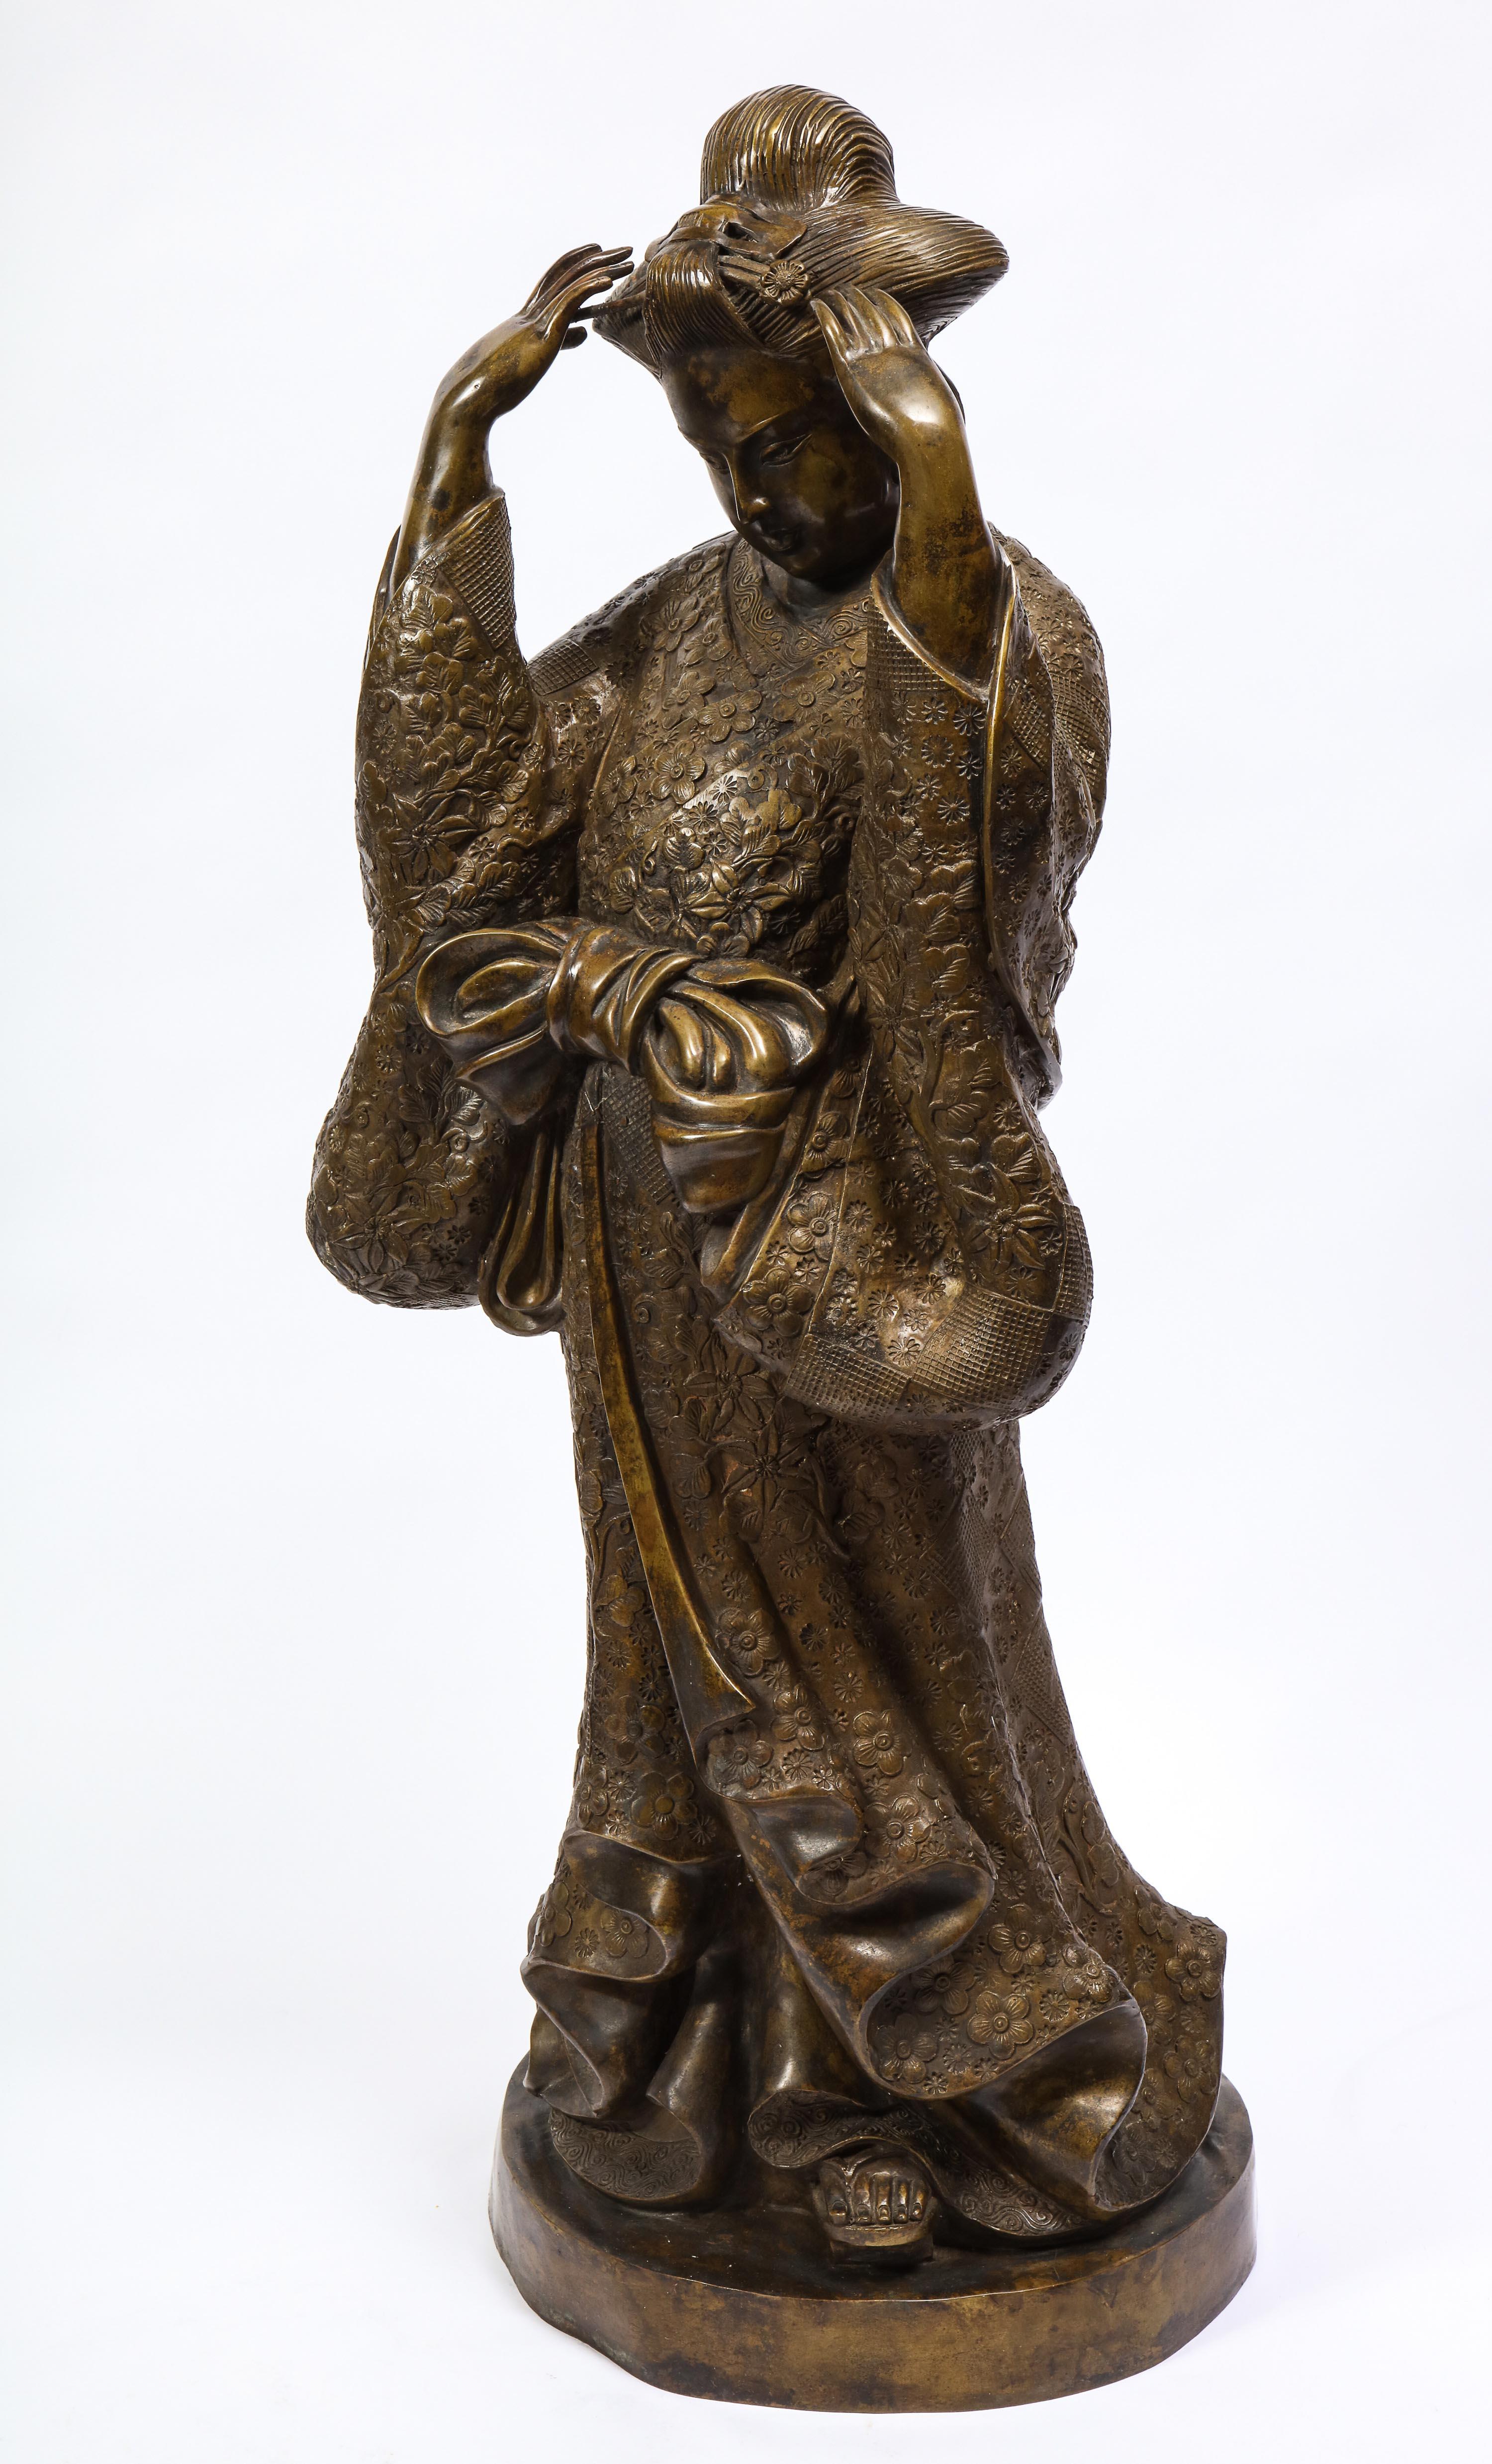 A beautiful French patinated bronze figure of a standing Japanese geisha in a traditional kimono with an obi. This geisha is exceptionally cast with immense detail. Starting from the head, the elaborate Yakko-shimada hairstyle with gorgeous kanzashi